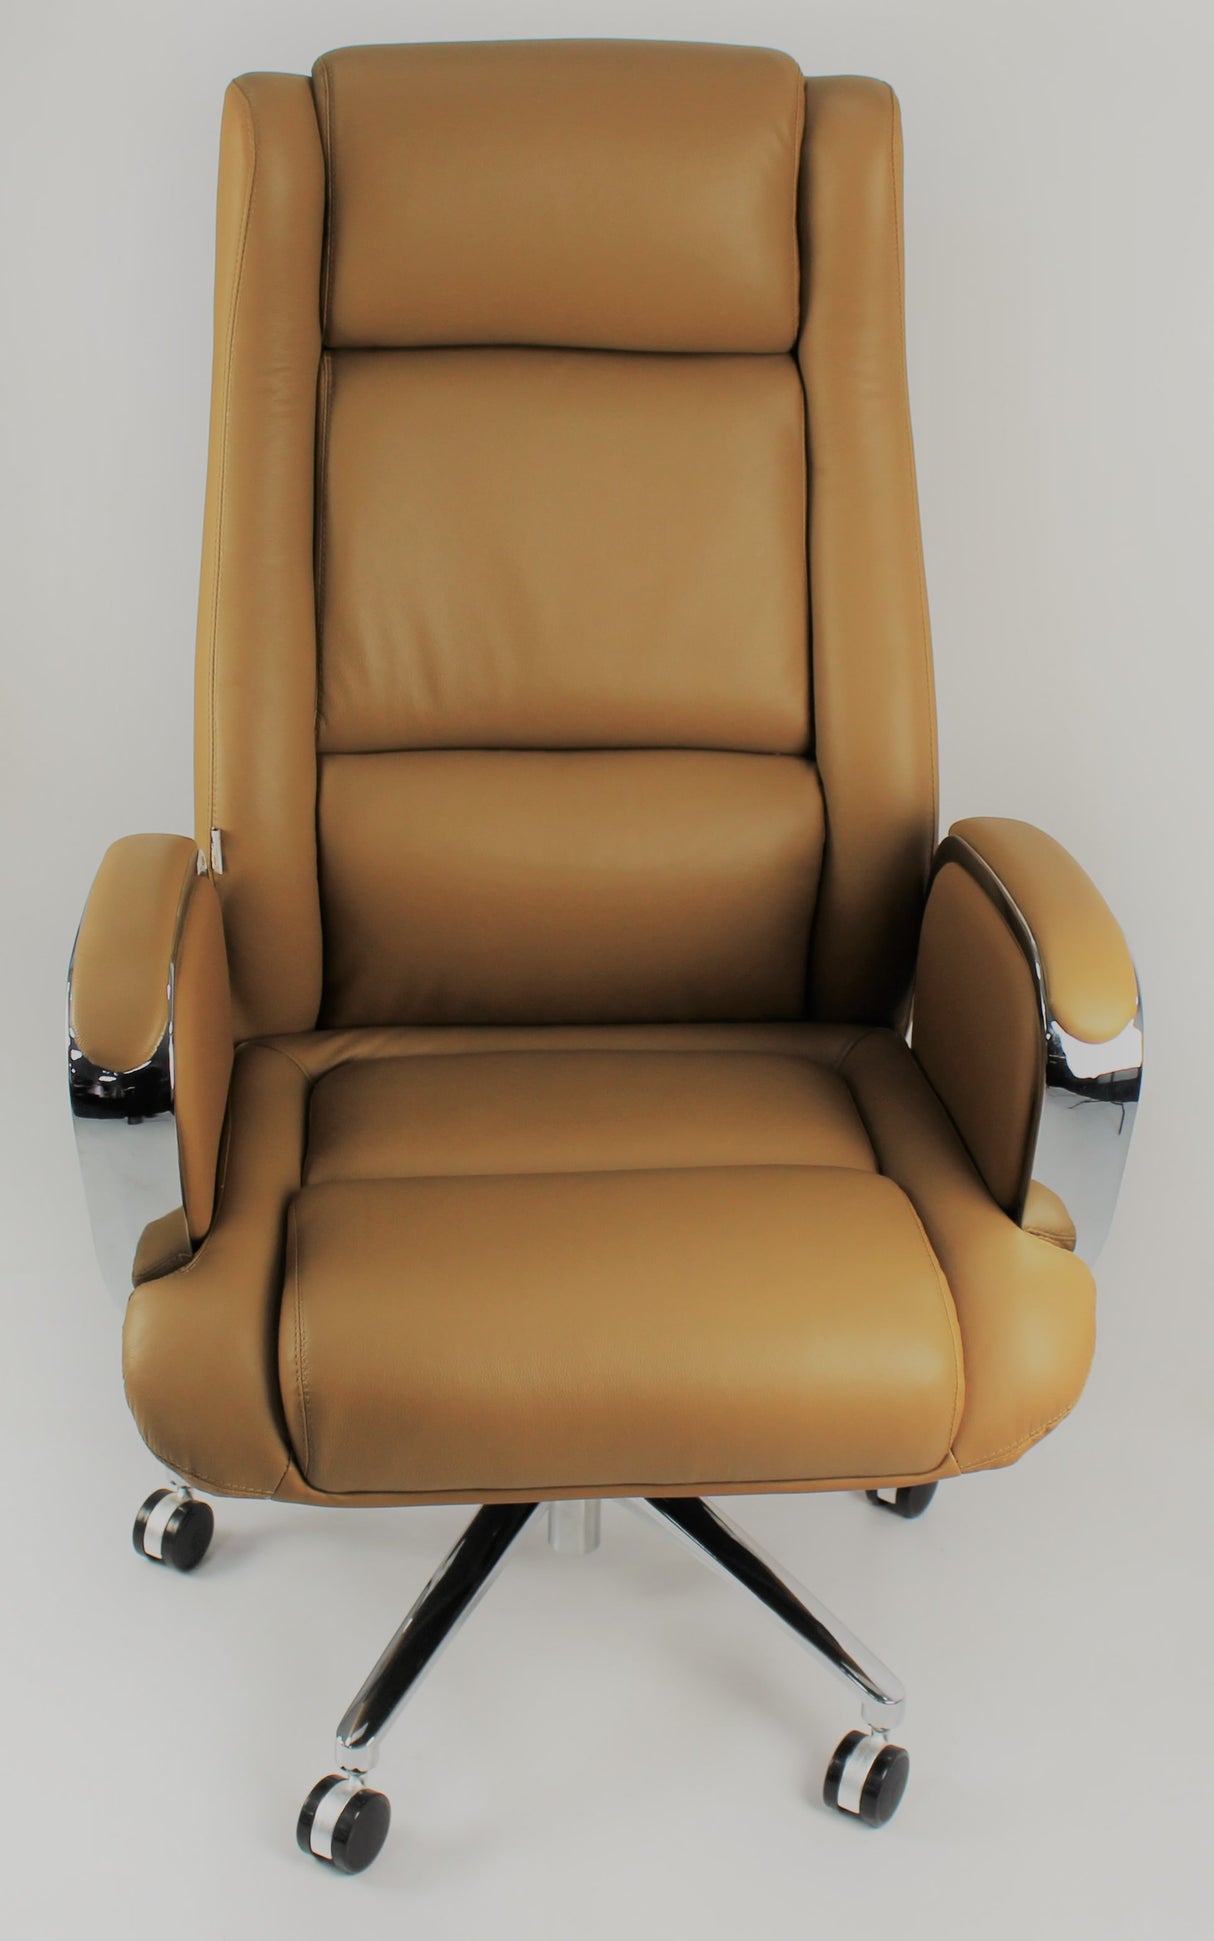 Beige Leather Executive Office Chair with Chrome Trimmed Arms - J1201